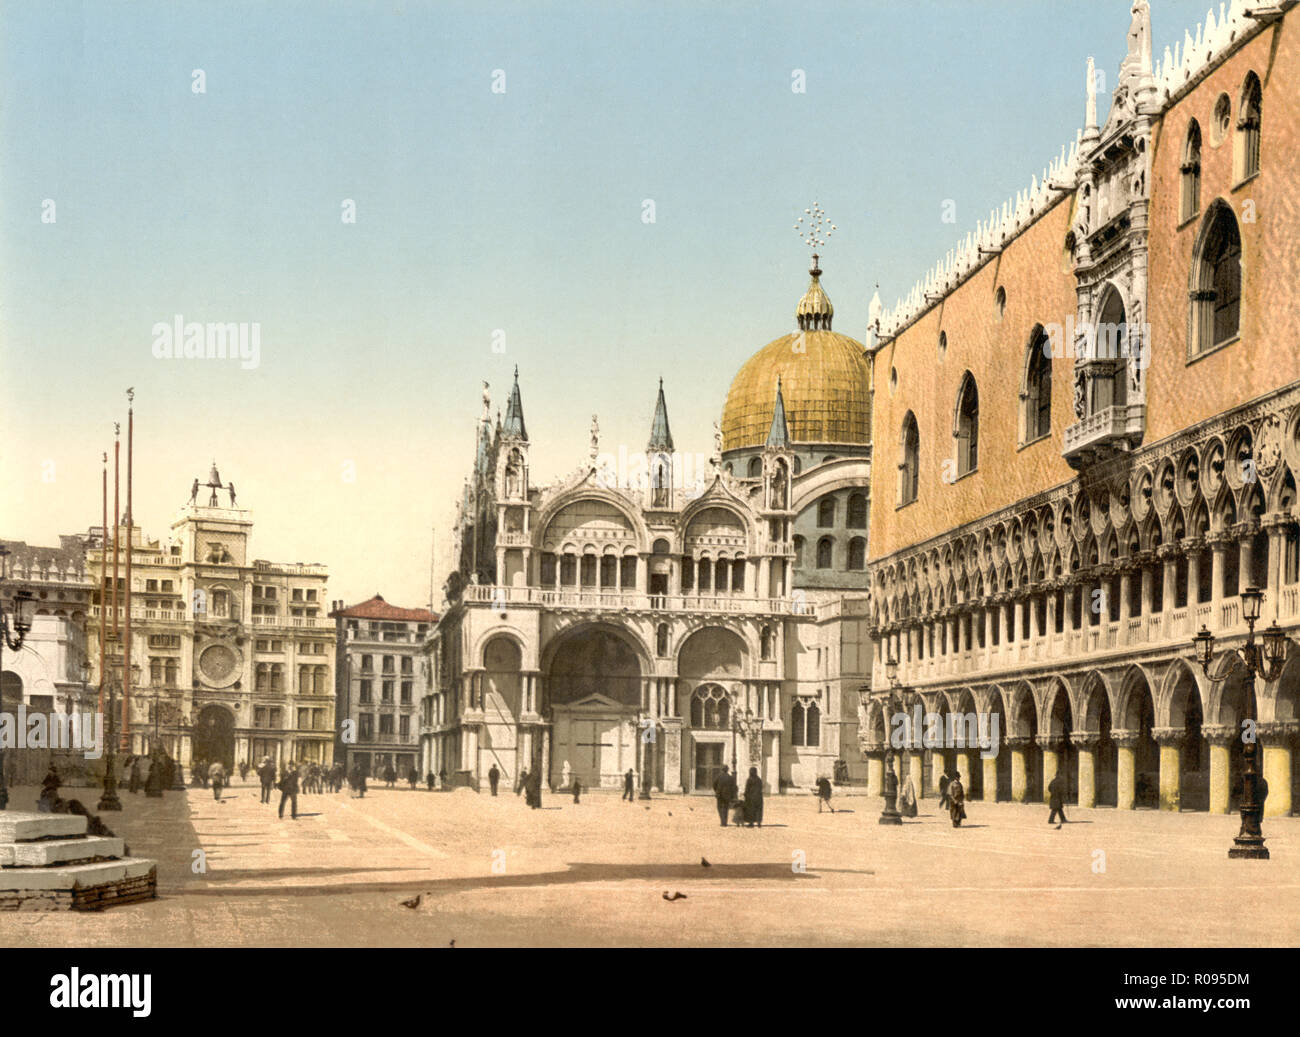 Clock tower, St. Mark's, and Doges' Palace, Piazzetta di San Marco, Venice, Italy, Photochrome Print, Detroit Publishing Company, 1900 Stock Photo